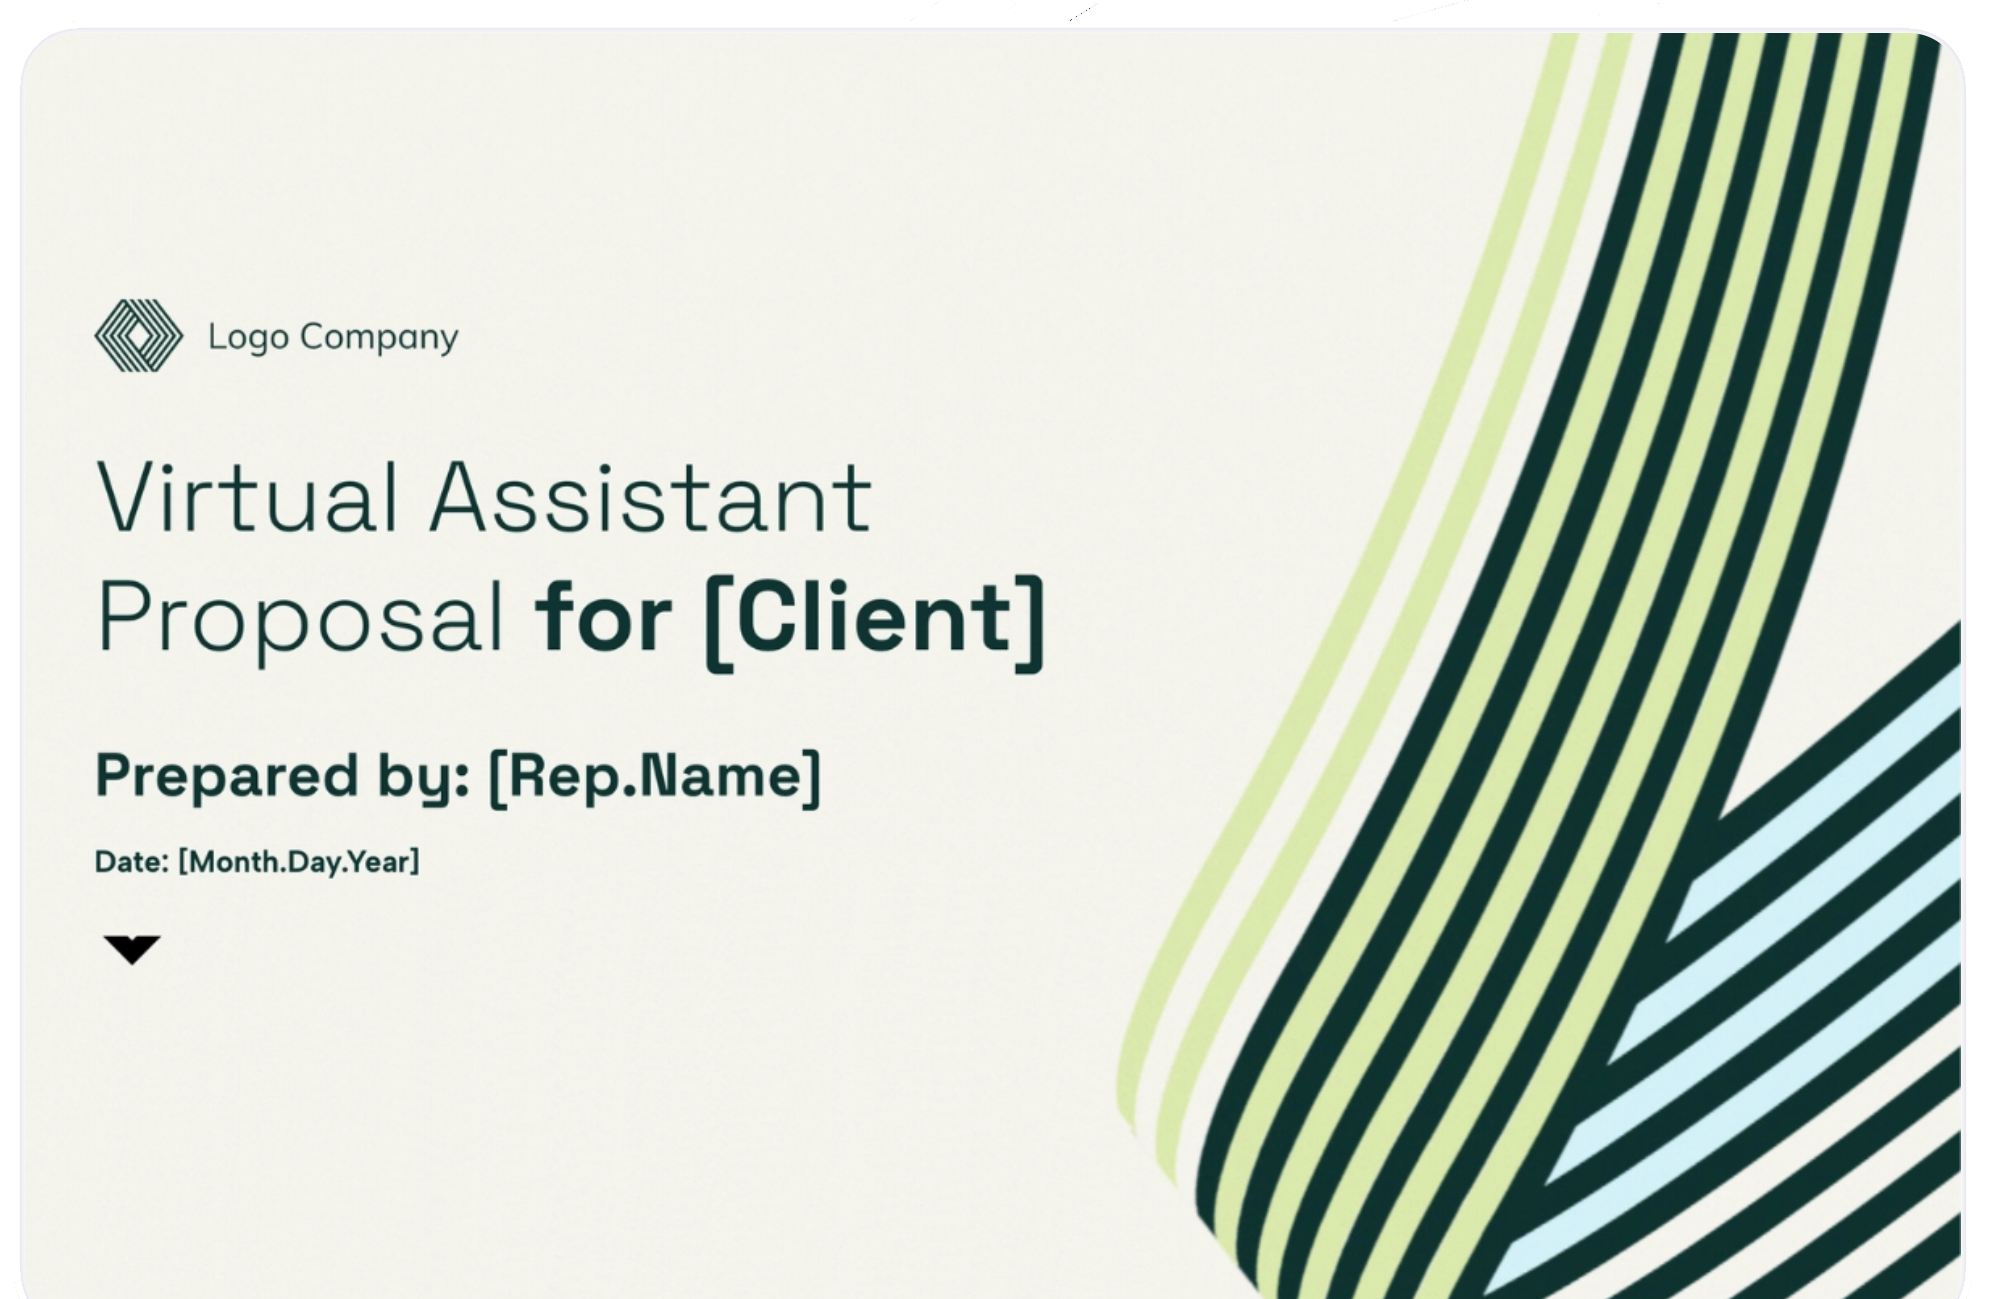 a virtual assistant proposal for a client is prepared by rep.name